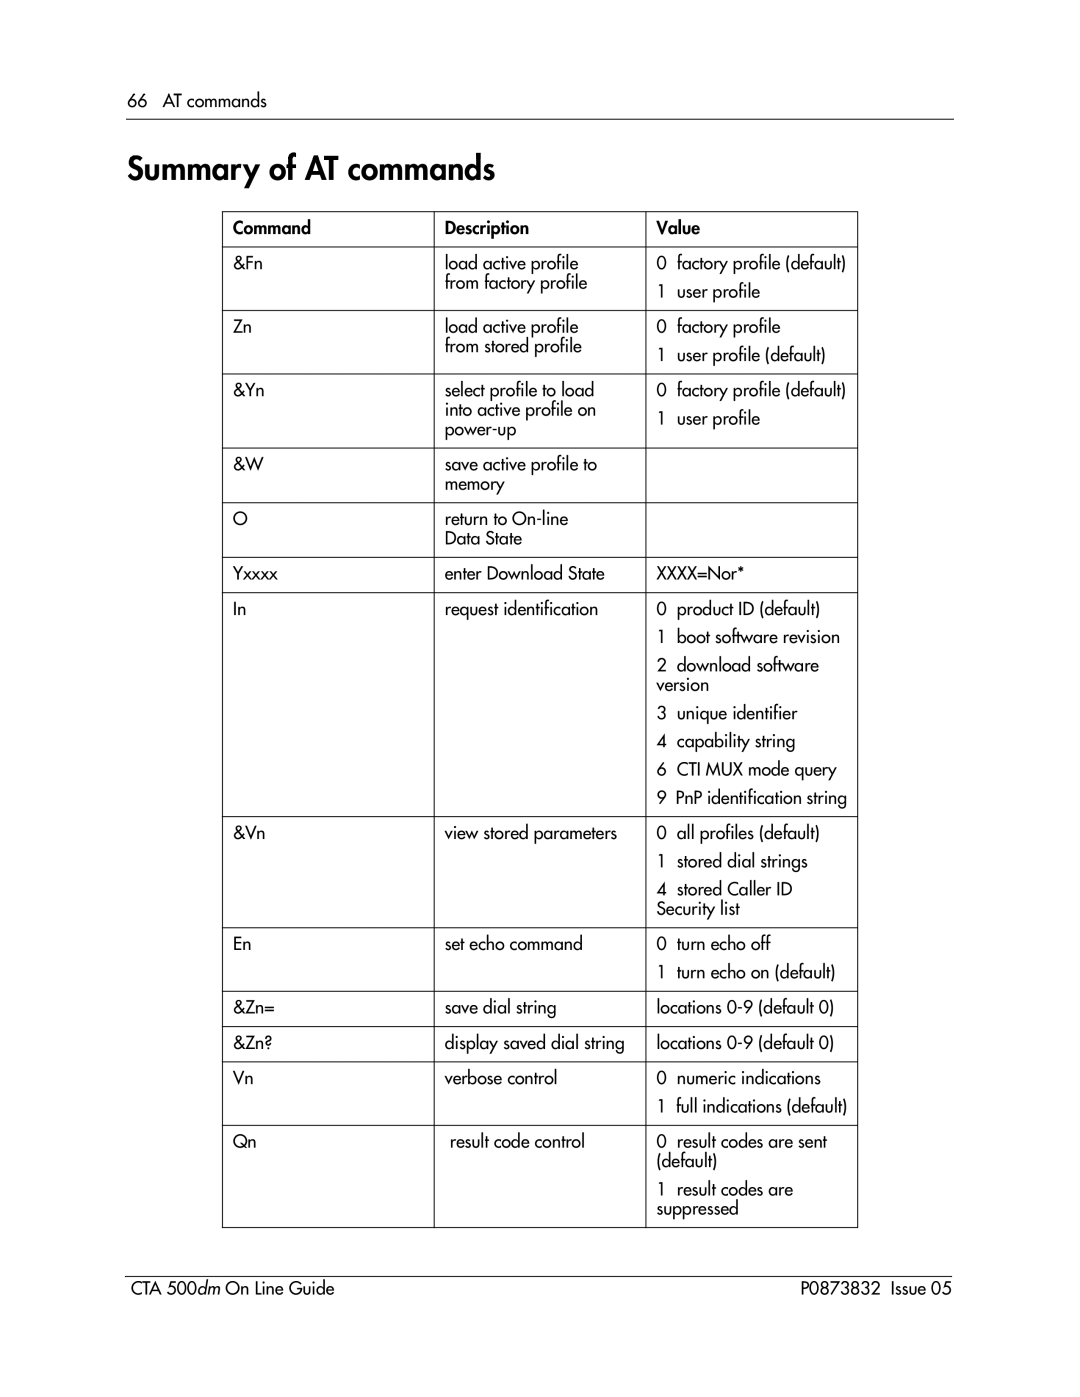 Nortel Networks CTA 500dm manual Summary of AT commands 